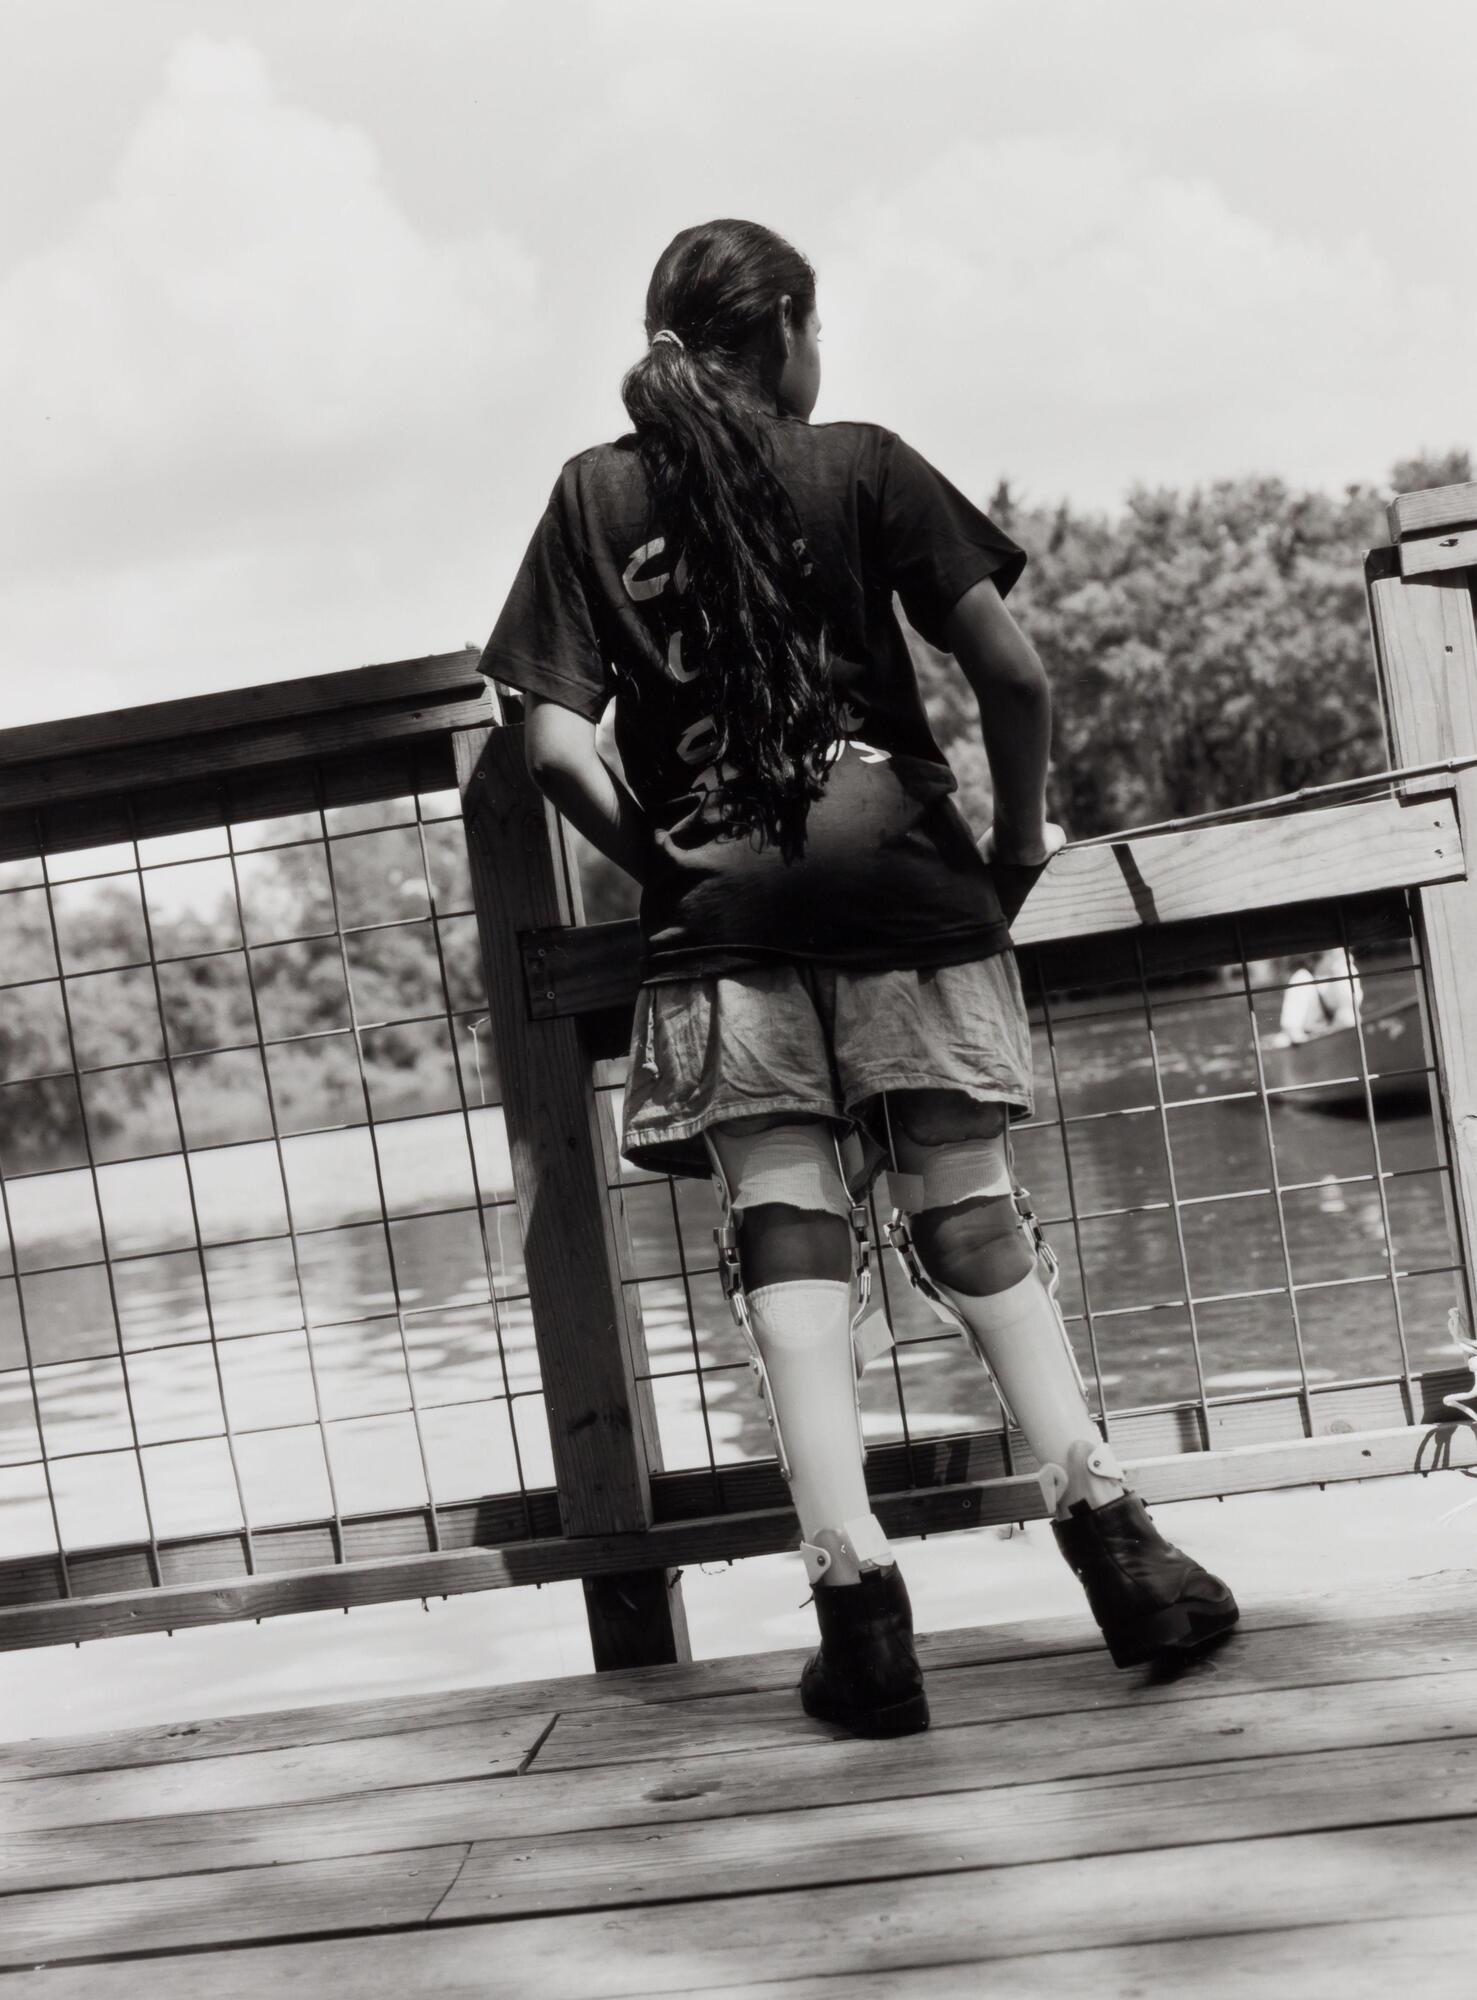 The back of a girl standing on a dock. She has a long ponytail and braces on her legs.